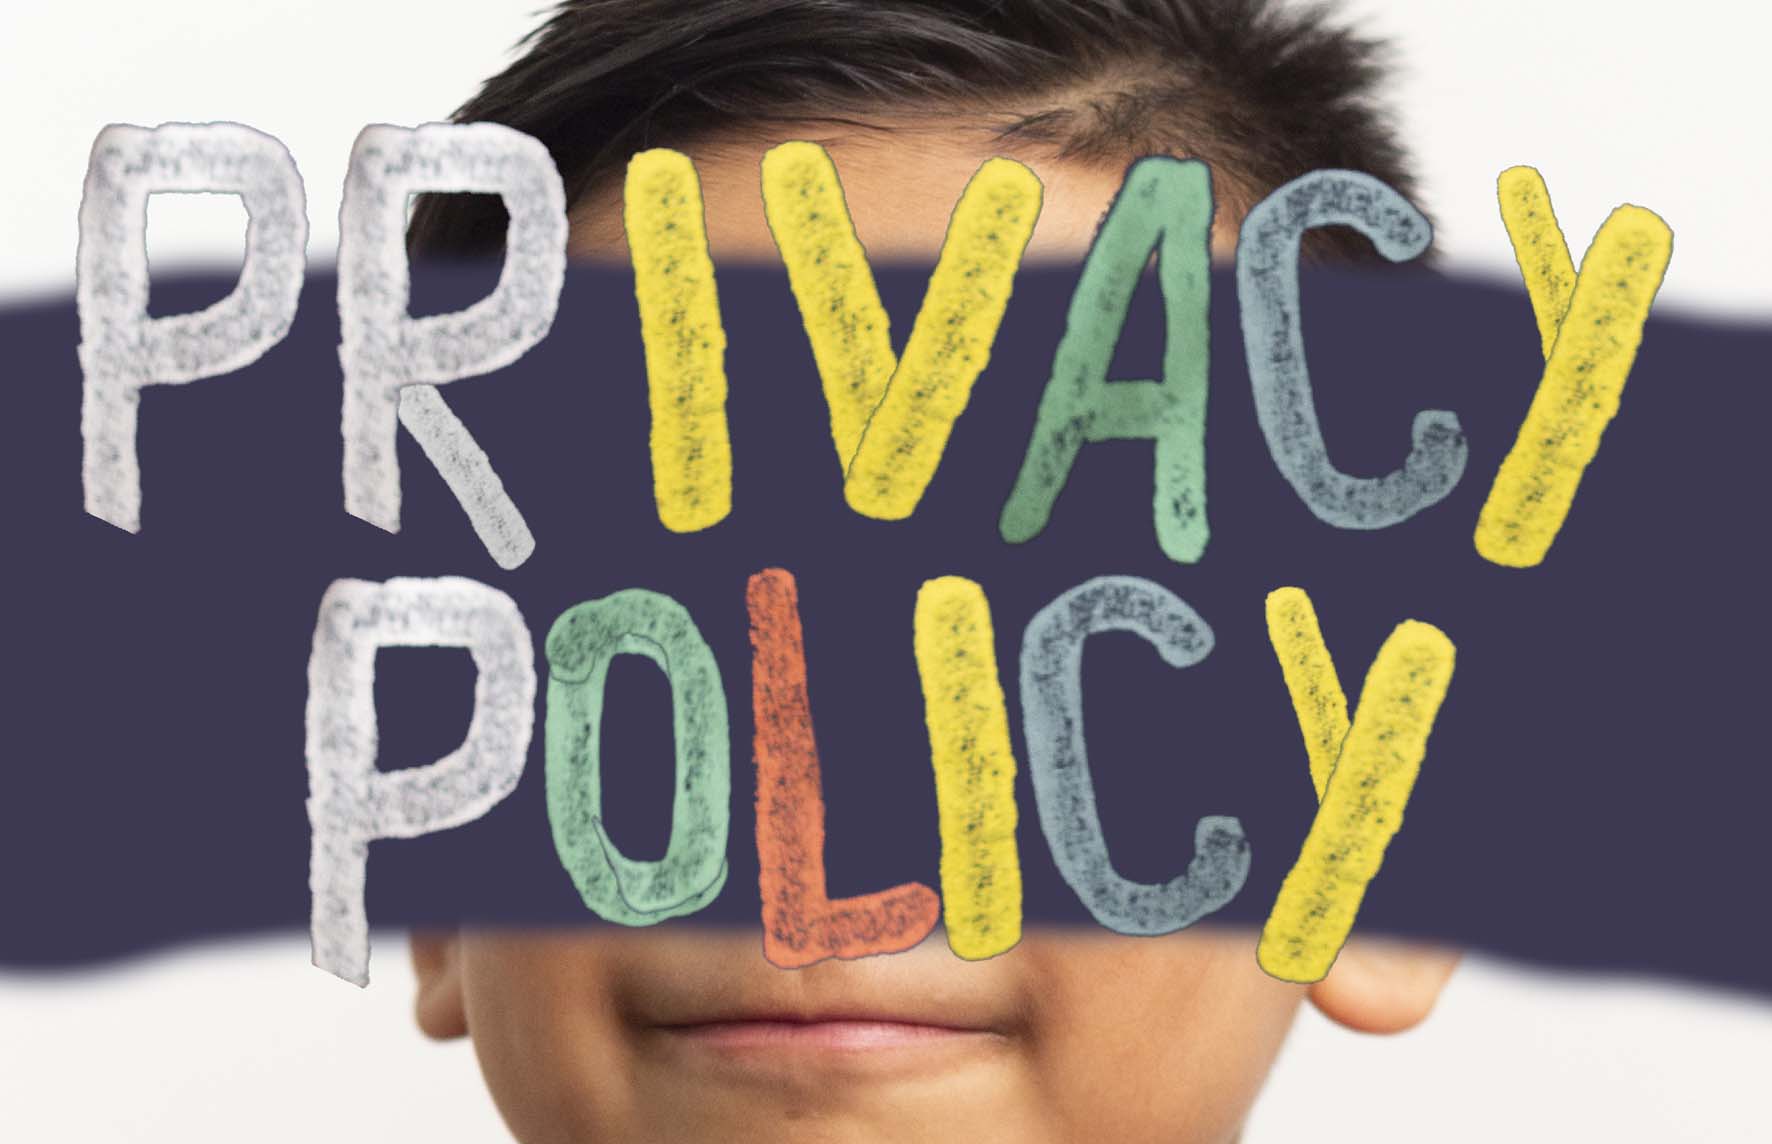 Privacy Policy – mostra